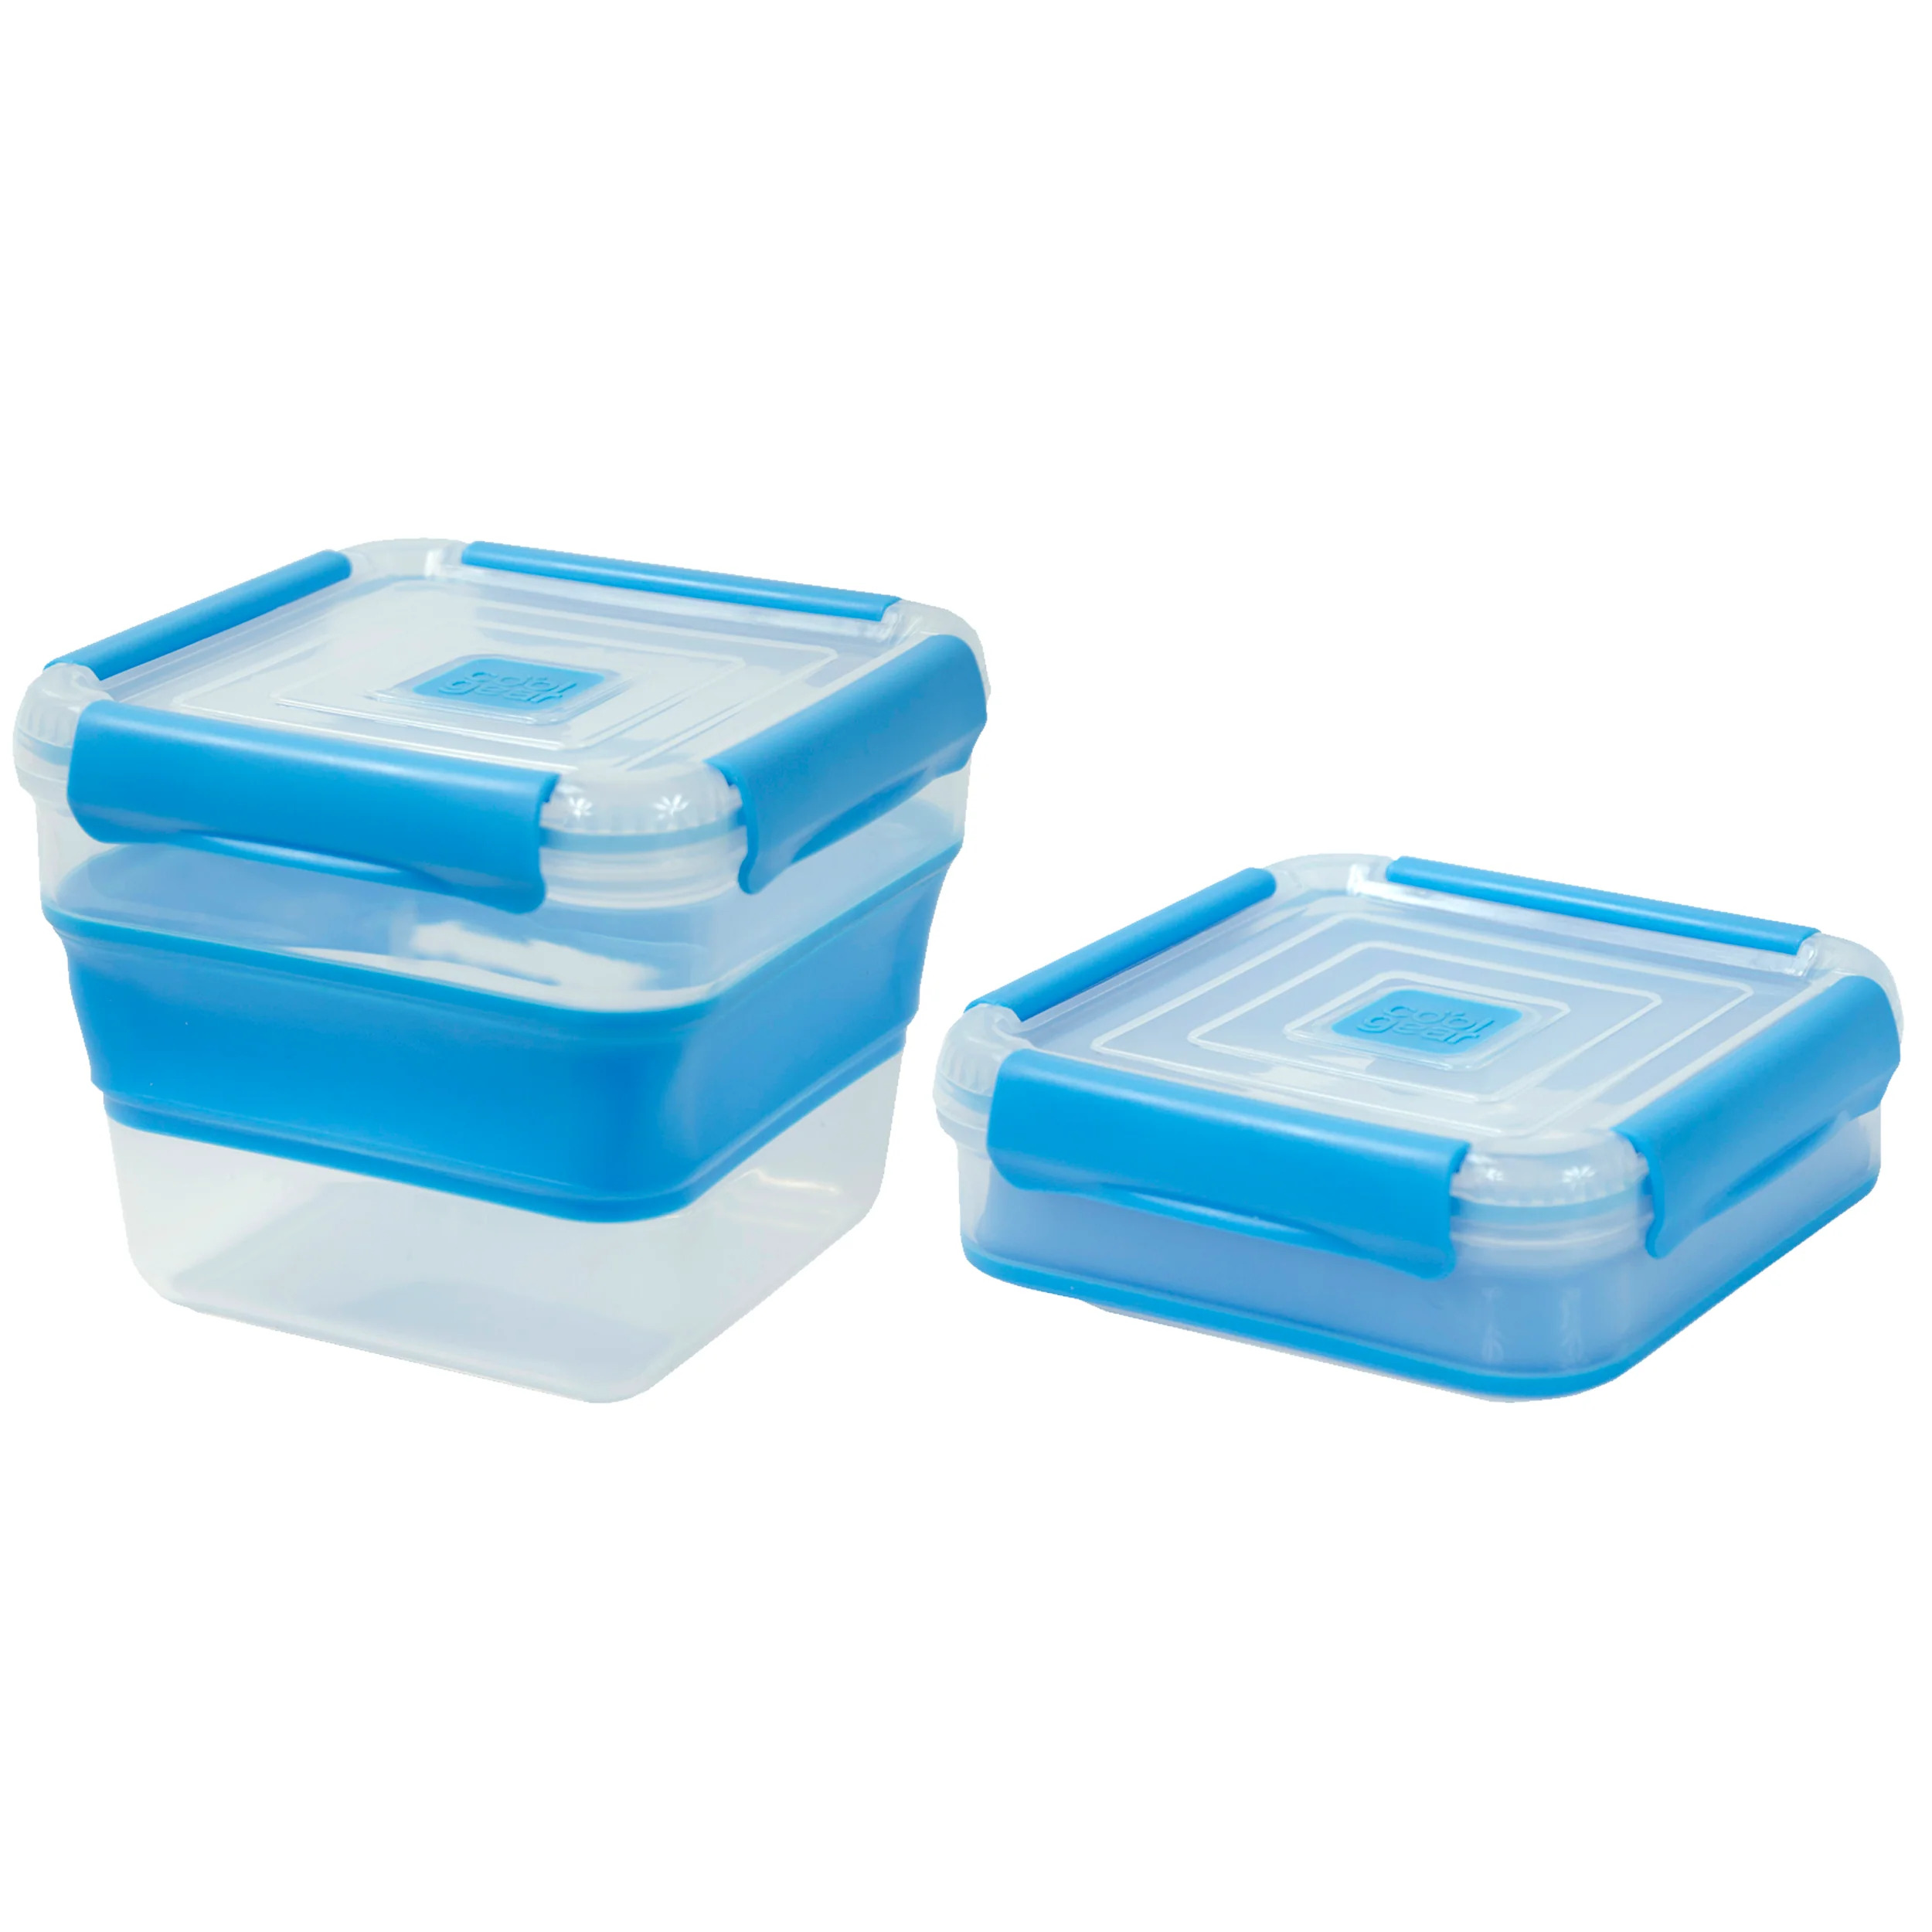 COOL GEAR 3-Pack Collapsible 7.5 Cup Square Food Container | Dishwasher and Microwave Safe | Perfect for On The Go Lunches and Leftovers | Expands to Hold 2x More | Air Tight Snaps Keeps Food Fresh - image 4 of 5